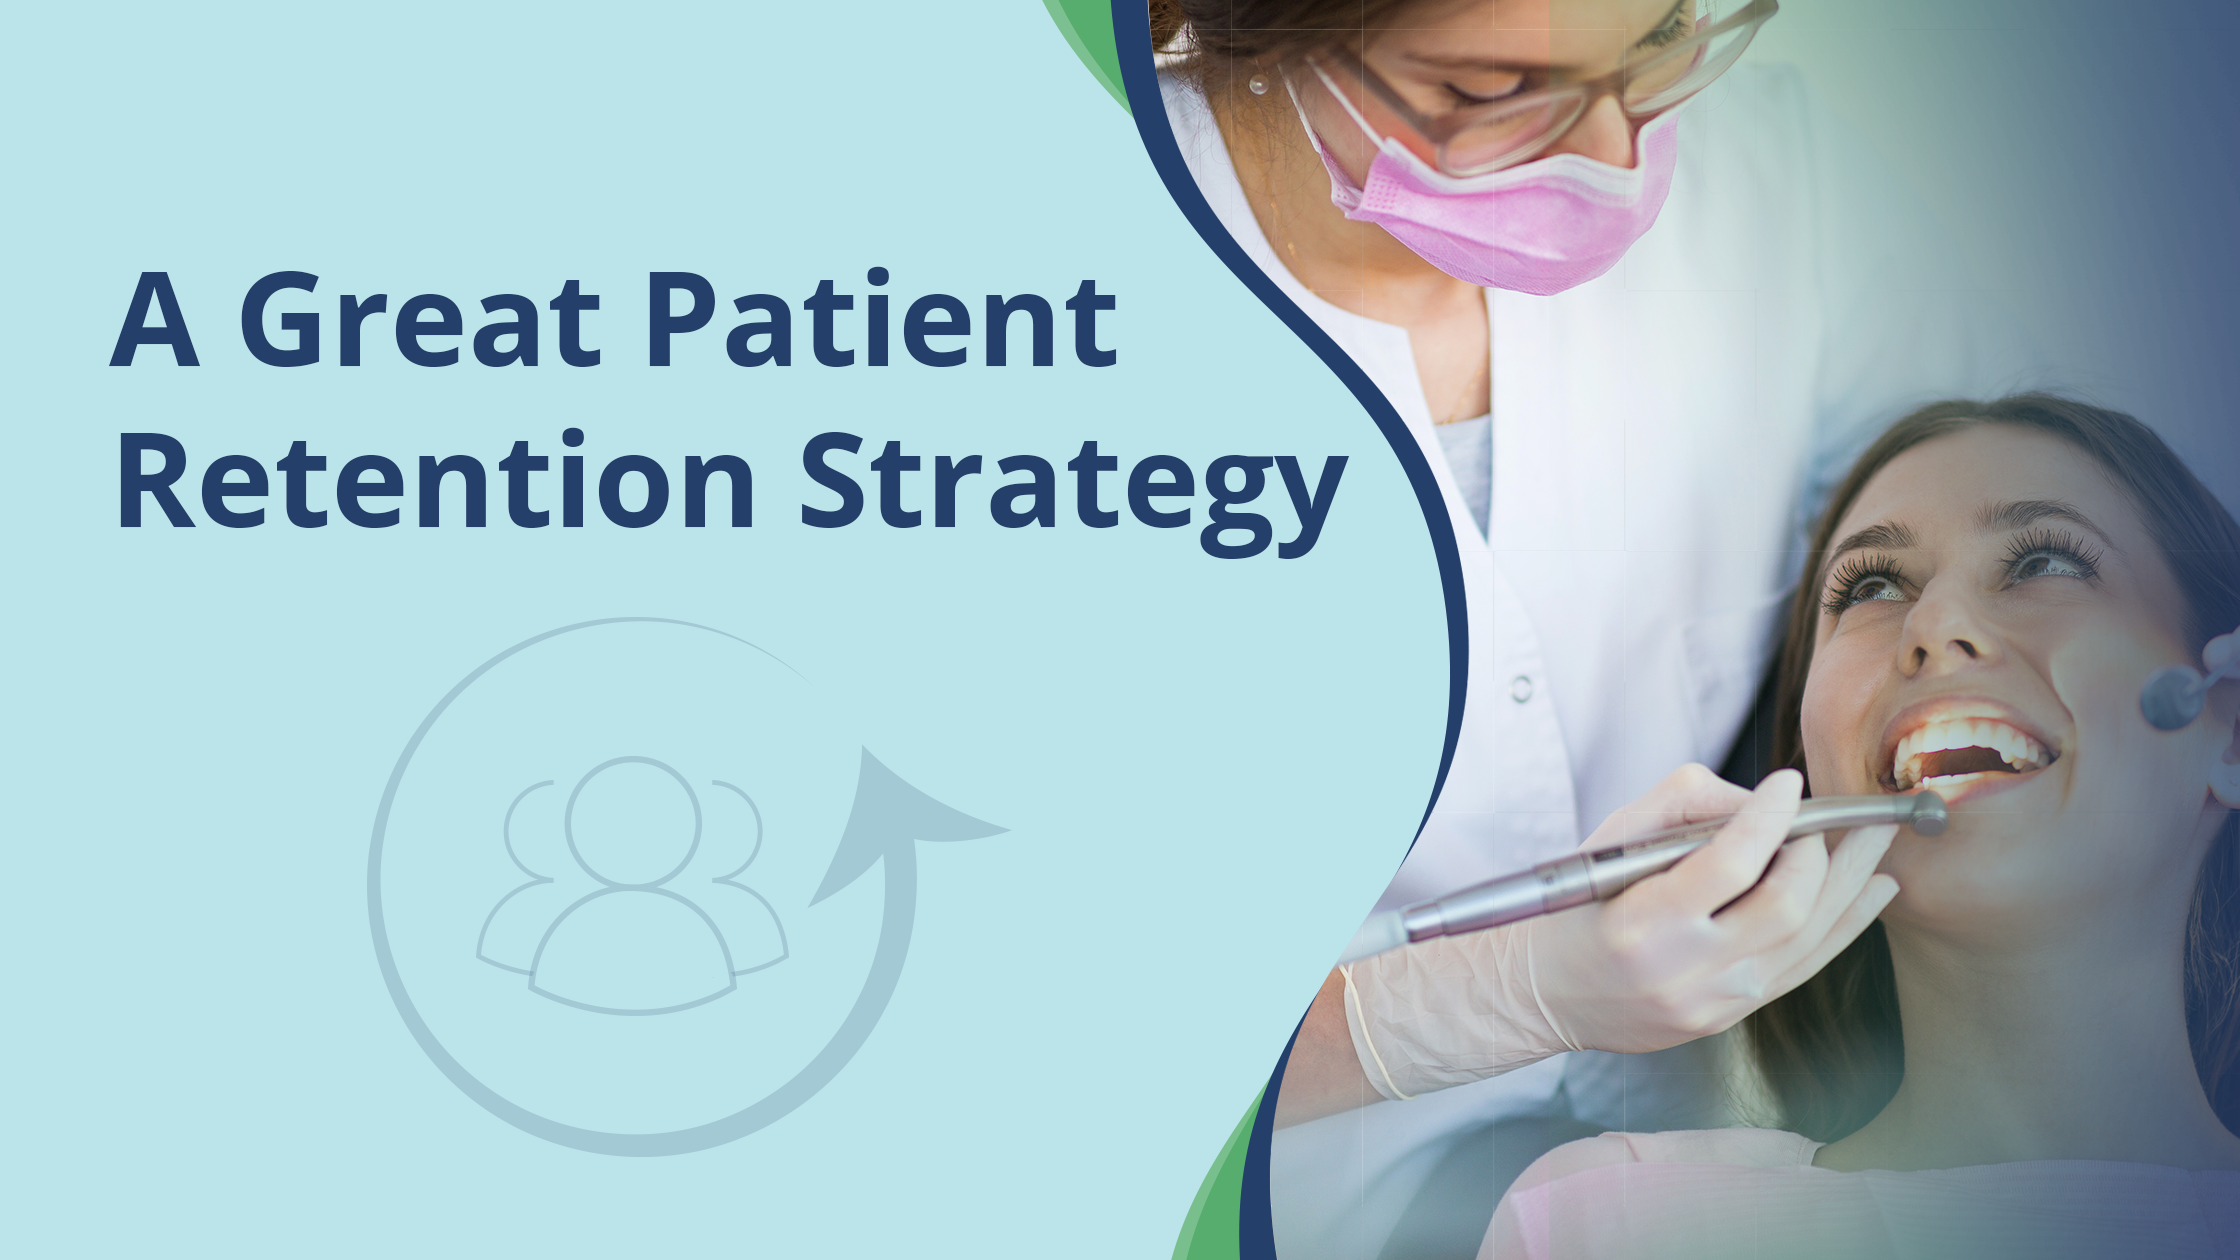 Create A Great Patient Retention Strategy